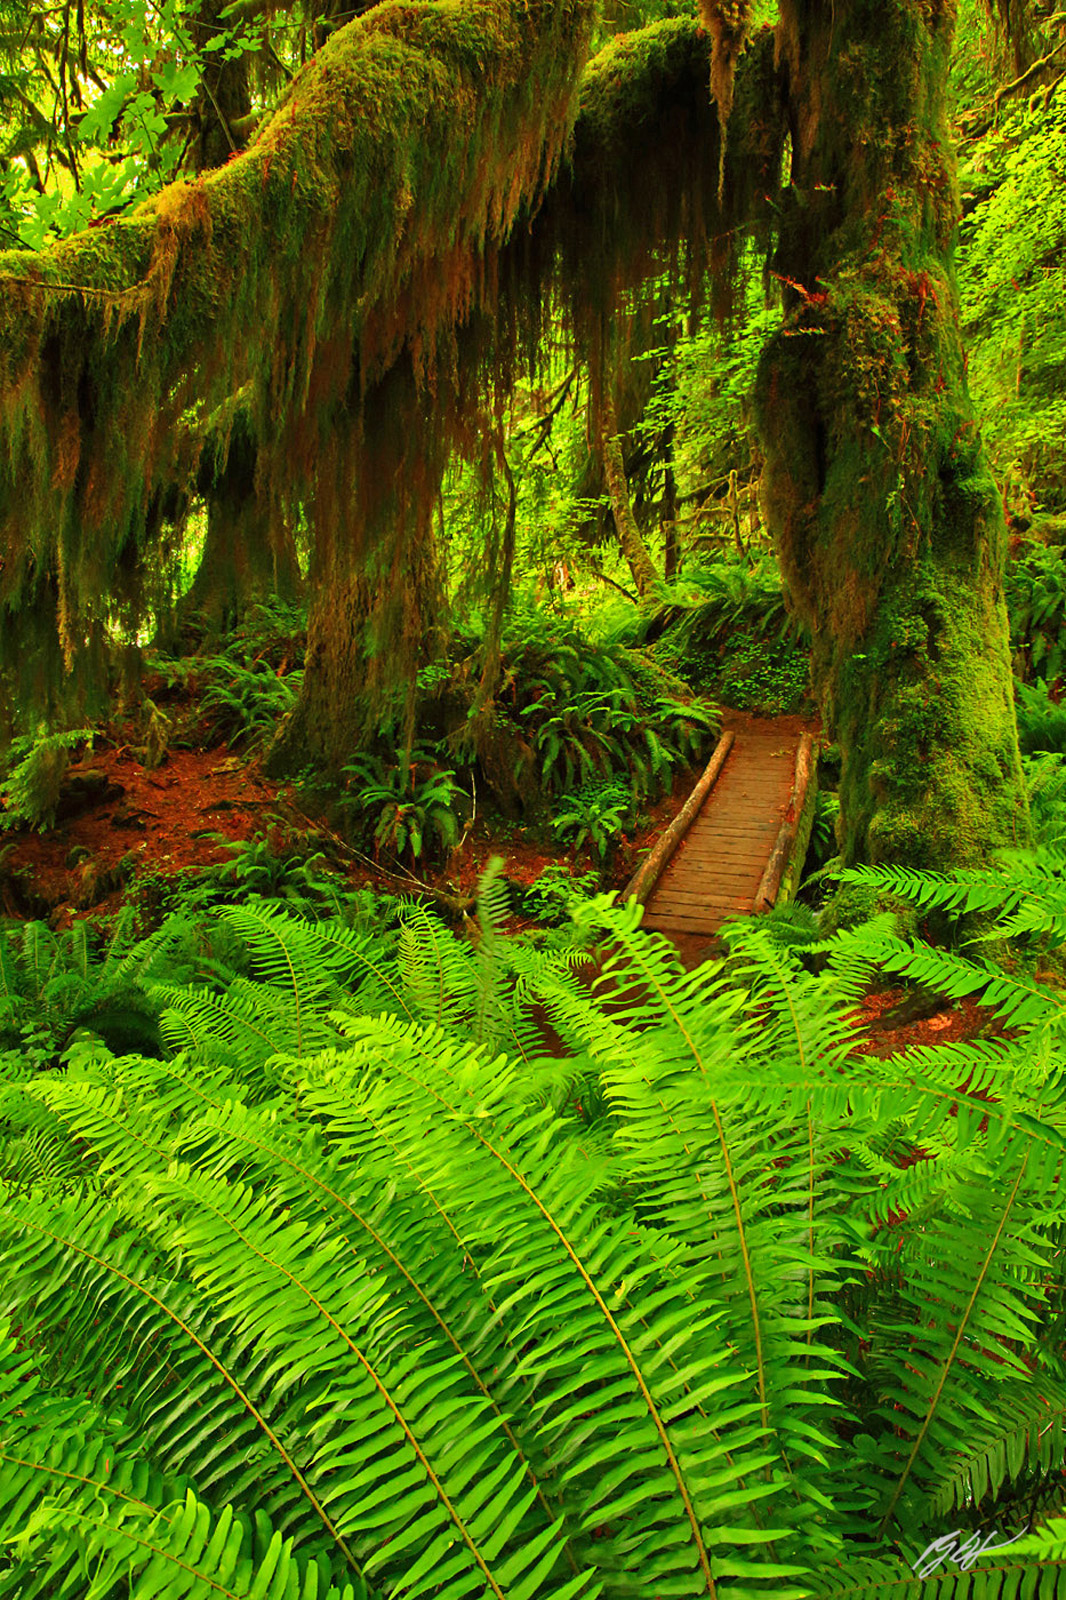 Mossy Maples Along the Hoh River Trail in Olympic National Park in Washington